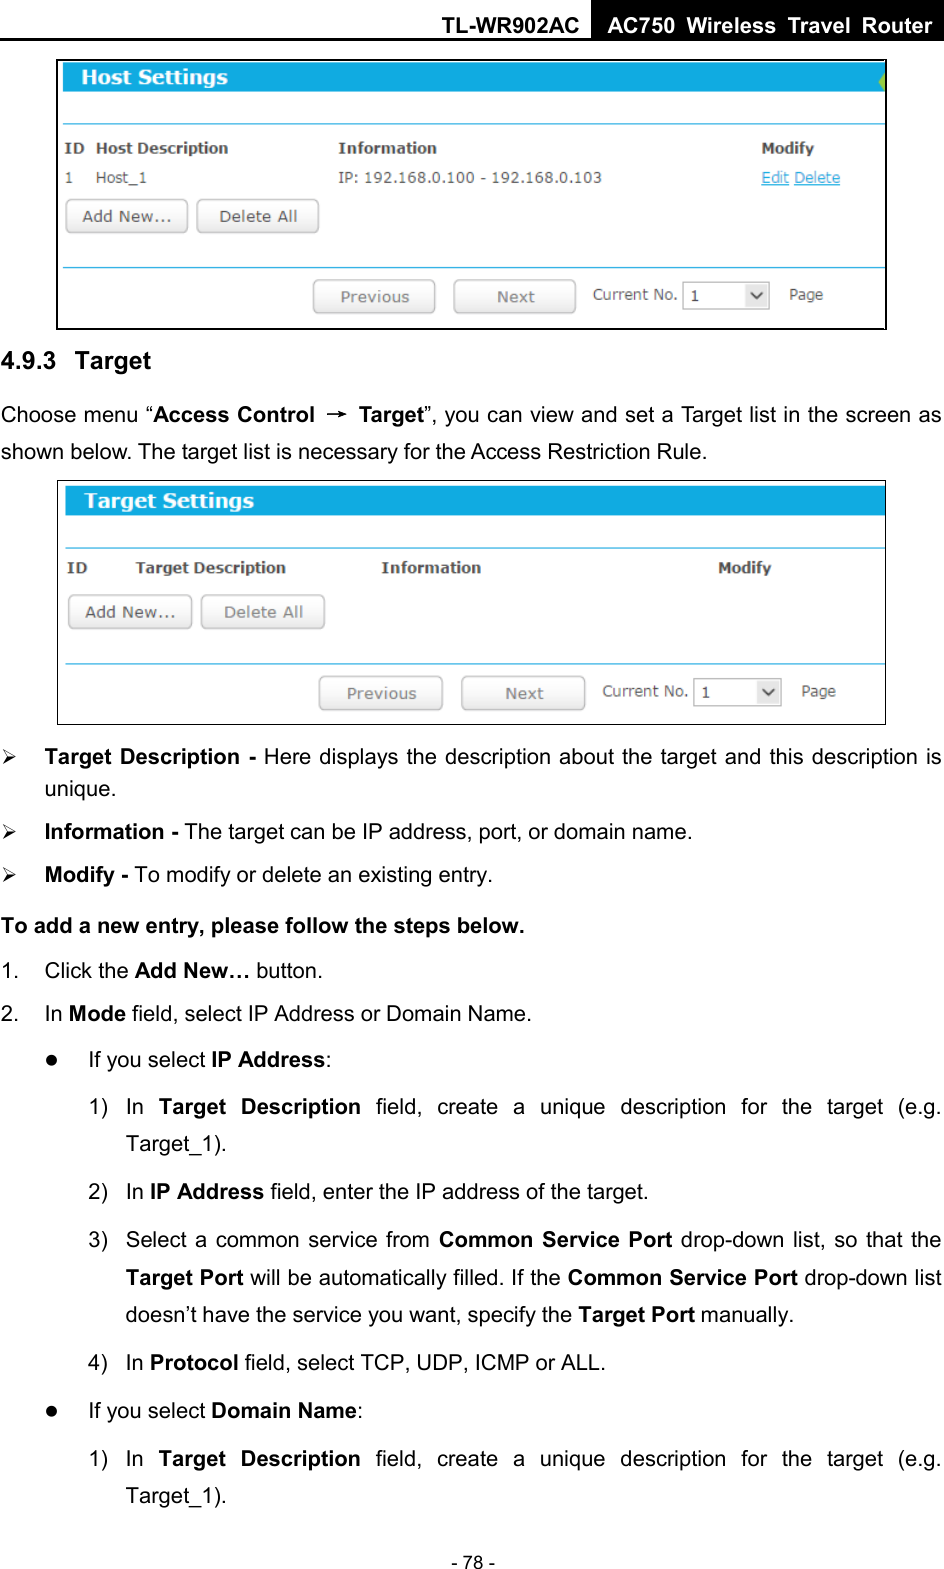 TL-WR902AC AC750  Wireless Travel Router  - 78 -  4.9.3  Target Choose menu “Access Control → Target”, you can view and set a Target list in the screen as shown below. The target list is necessary for the Access Restriction Rule.   Target Description - Here displays the description about the target and this description is unique.    Information - The target can be IP address, port, or domain name.    Modify - To modify or delete an existing entry.   To add a new entry, please follow the steps below. 1.  Click the Add New… button. 2. In Mode field, select IP Address or Domain Name.  If you select IP Address:   1) In  Target Description field, create a unique description for the target (e.g. Target_1). 2)  In IP Address field, enter the IP address of the target. 3) Select a common service from Common Service Port drop-down list, so that the Target Port will be automatically filled. If the Common Service Port drop-down list doesn’t have the service you want, specify the Target Port manually. 4)  In Protocol field, select TCP, UDP, ICMP or ALL.   If you select Domain Name: 1) In  Target Description field, create a unique description for the target (e.g. Target_1). 